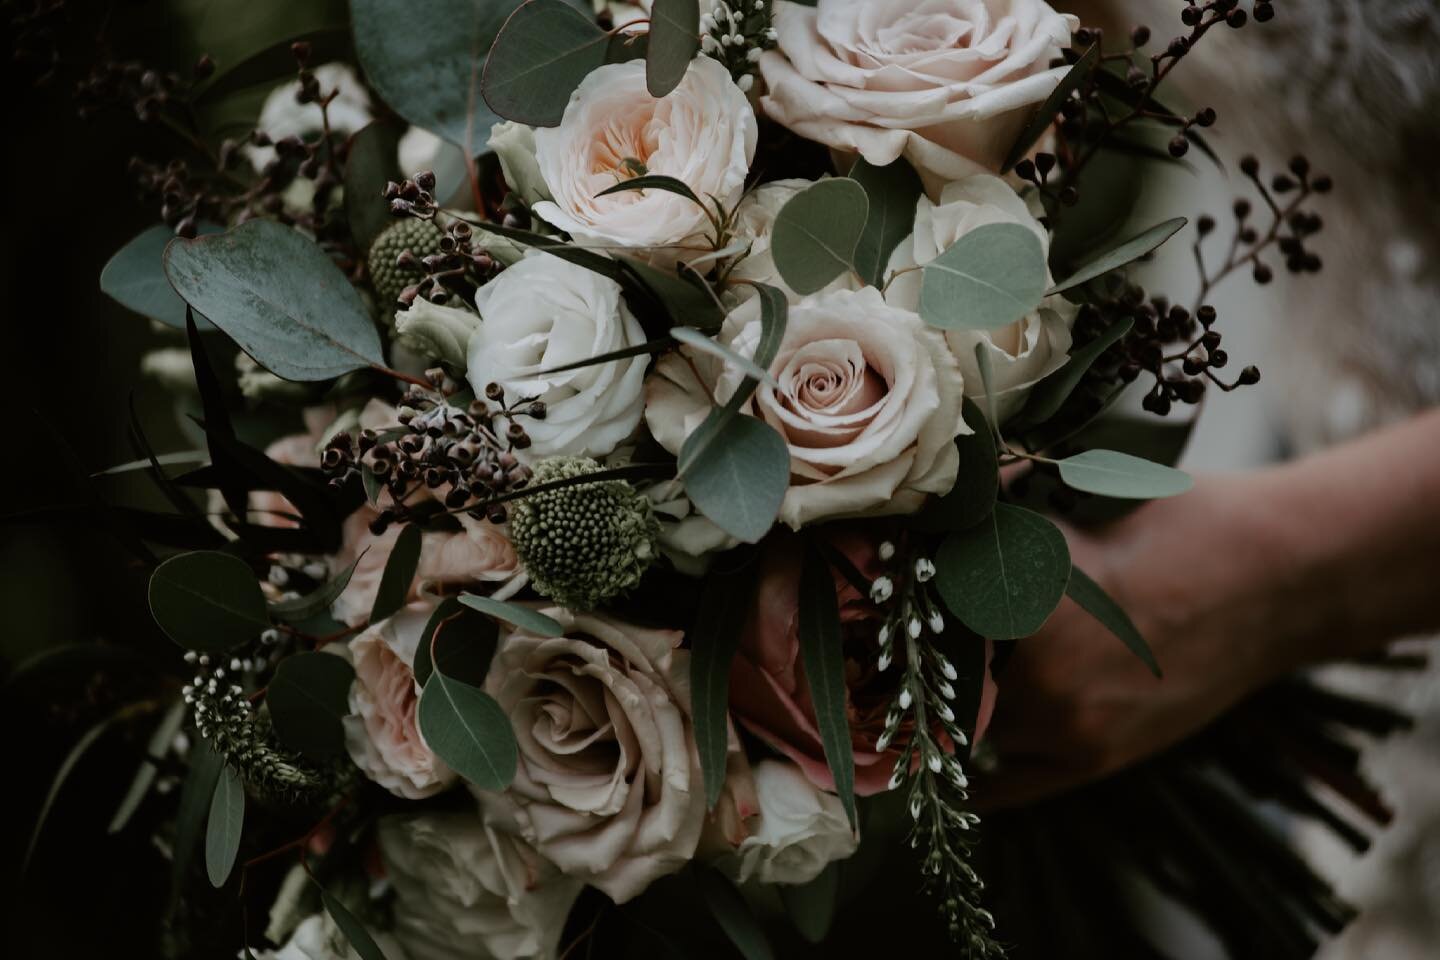 This bouquet was a dream